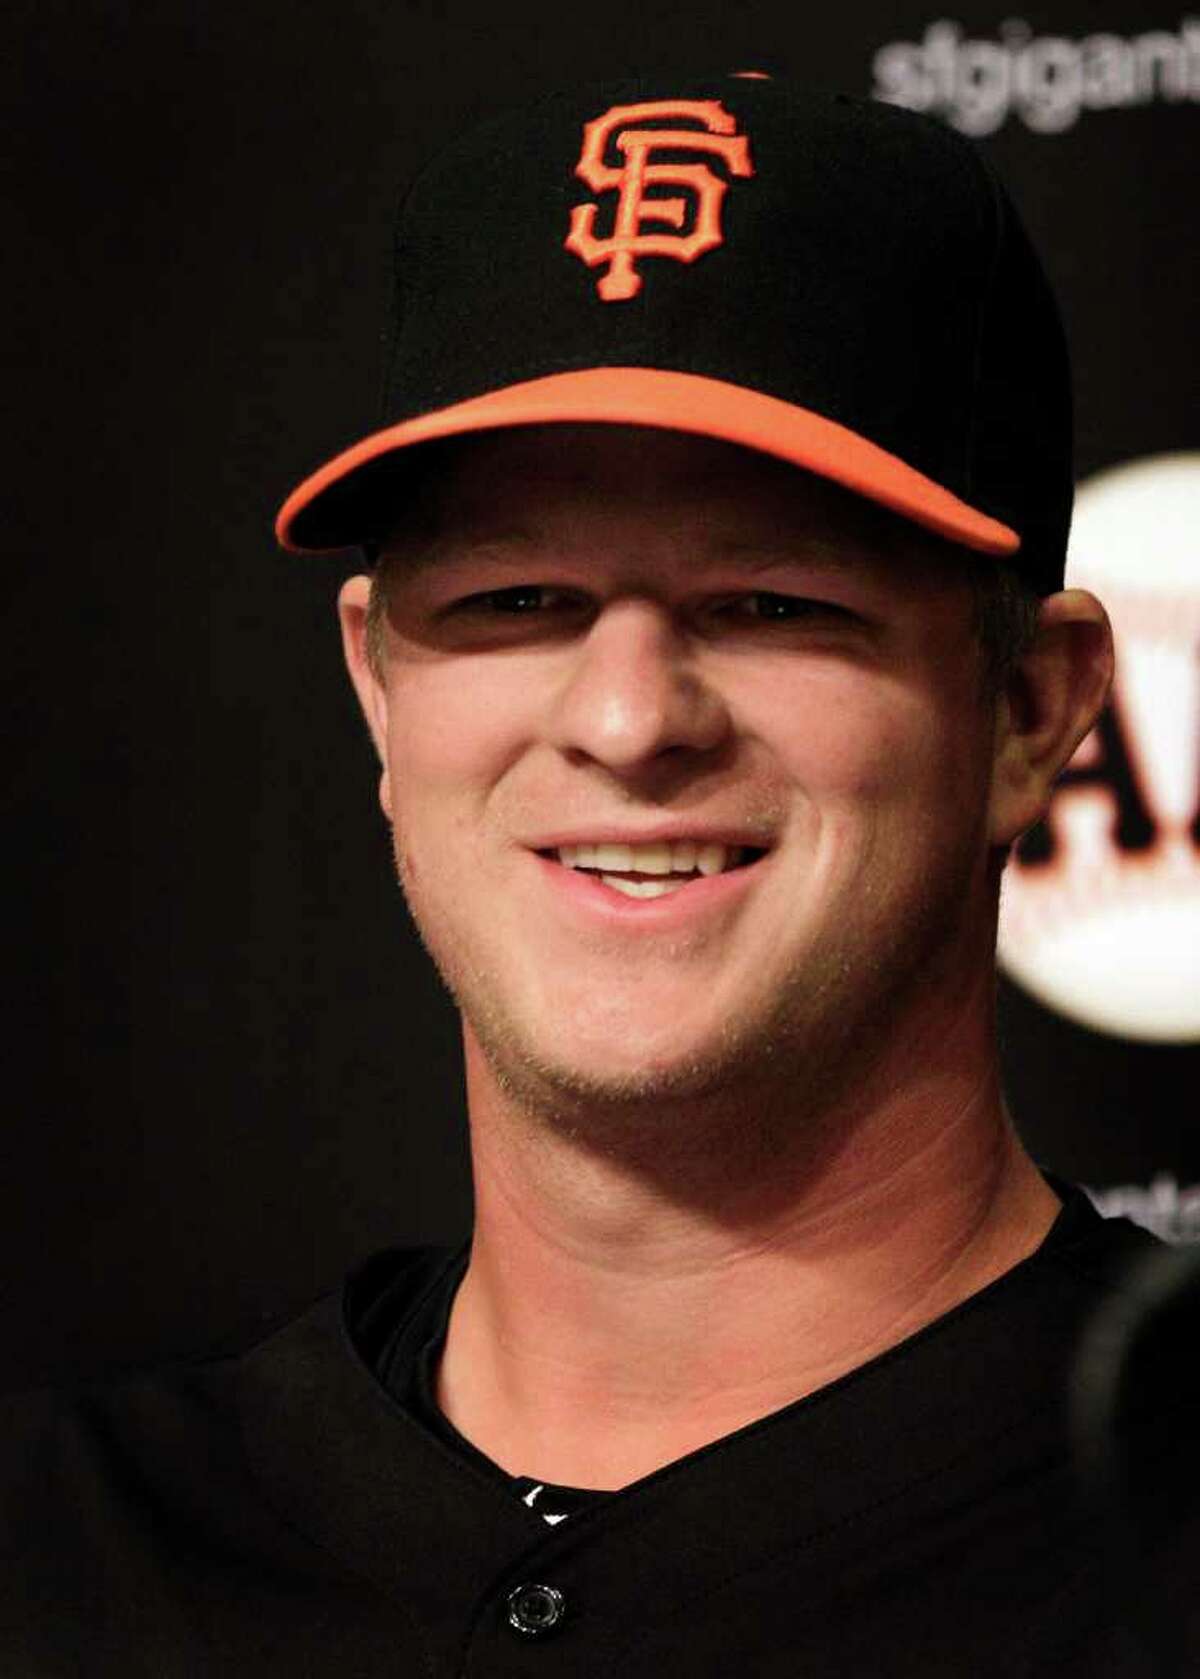 San Francisco Giants pitcher Matt Cain smiles during a news conference Monday, April 2, 2012, in San Francisco. Cain and the Giants agreed Monday to a $127.5 million, six-year contract, the largest deal for a right-handed pitcher in baseball history. The agreement adds $112.5 million over five years to the $15 million salary for 2012 that was remaining in his previous deal. (AP Photo/Ben Margot)